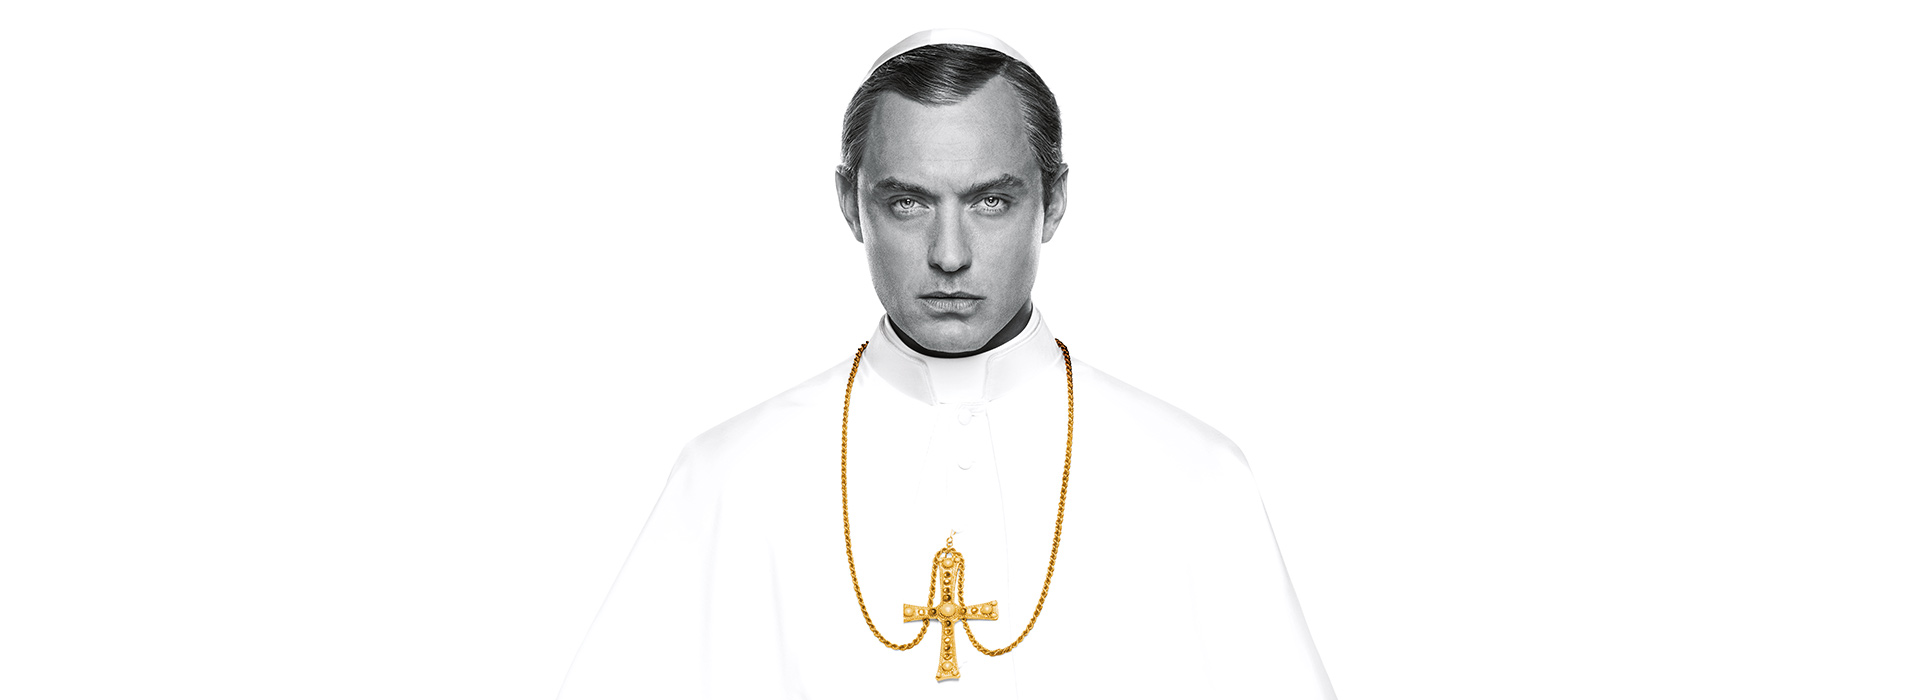 The Young Pope show on ratings (cancel or season 2?)